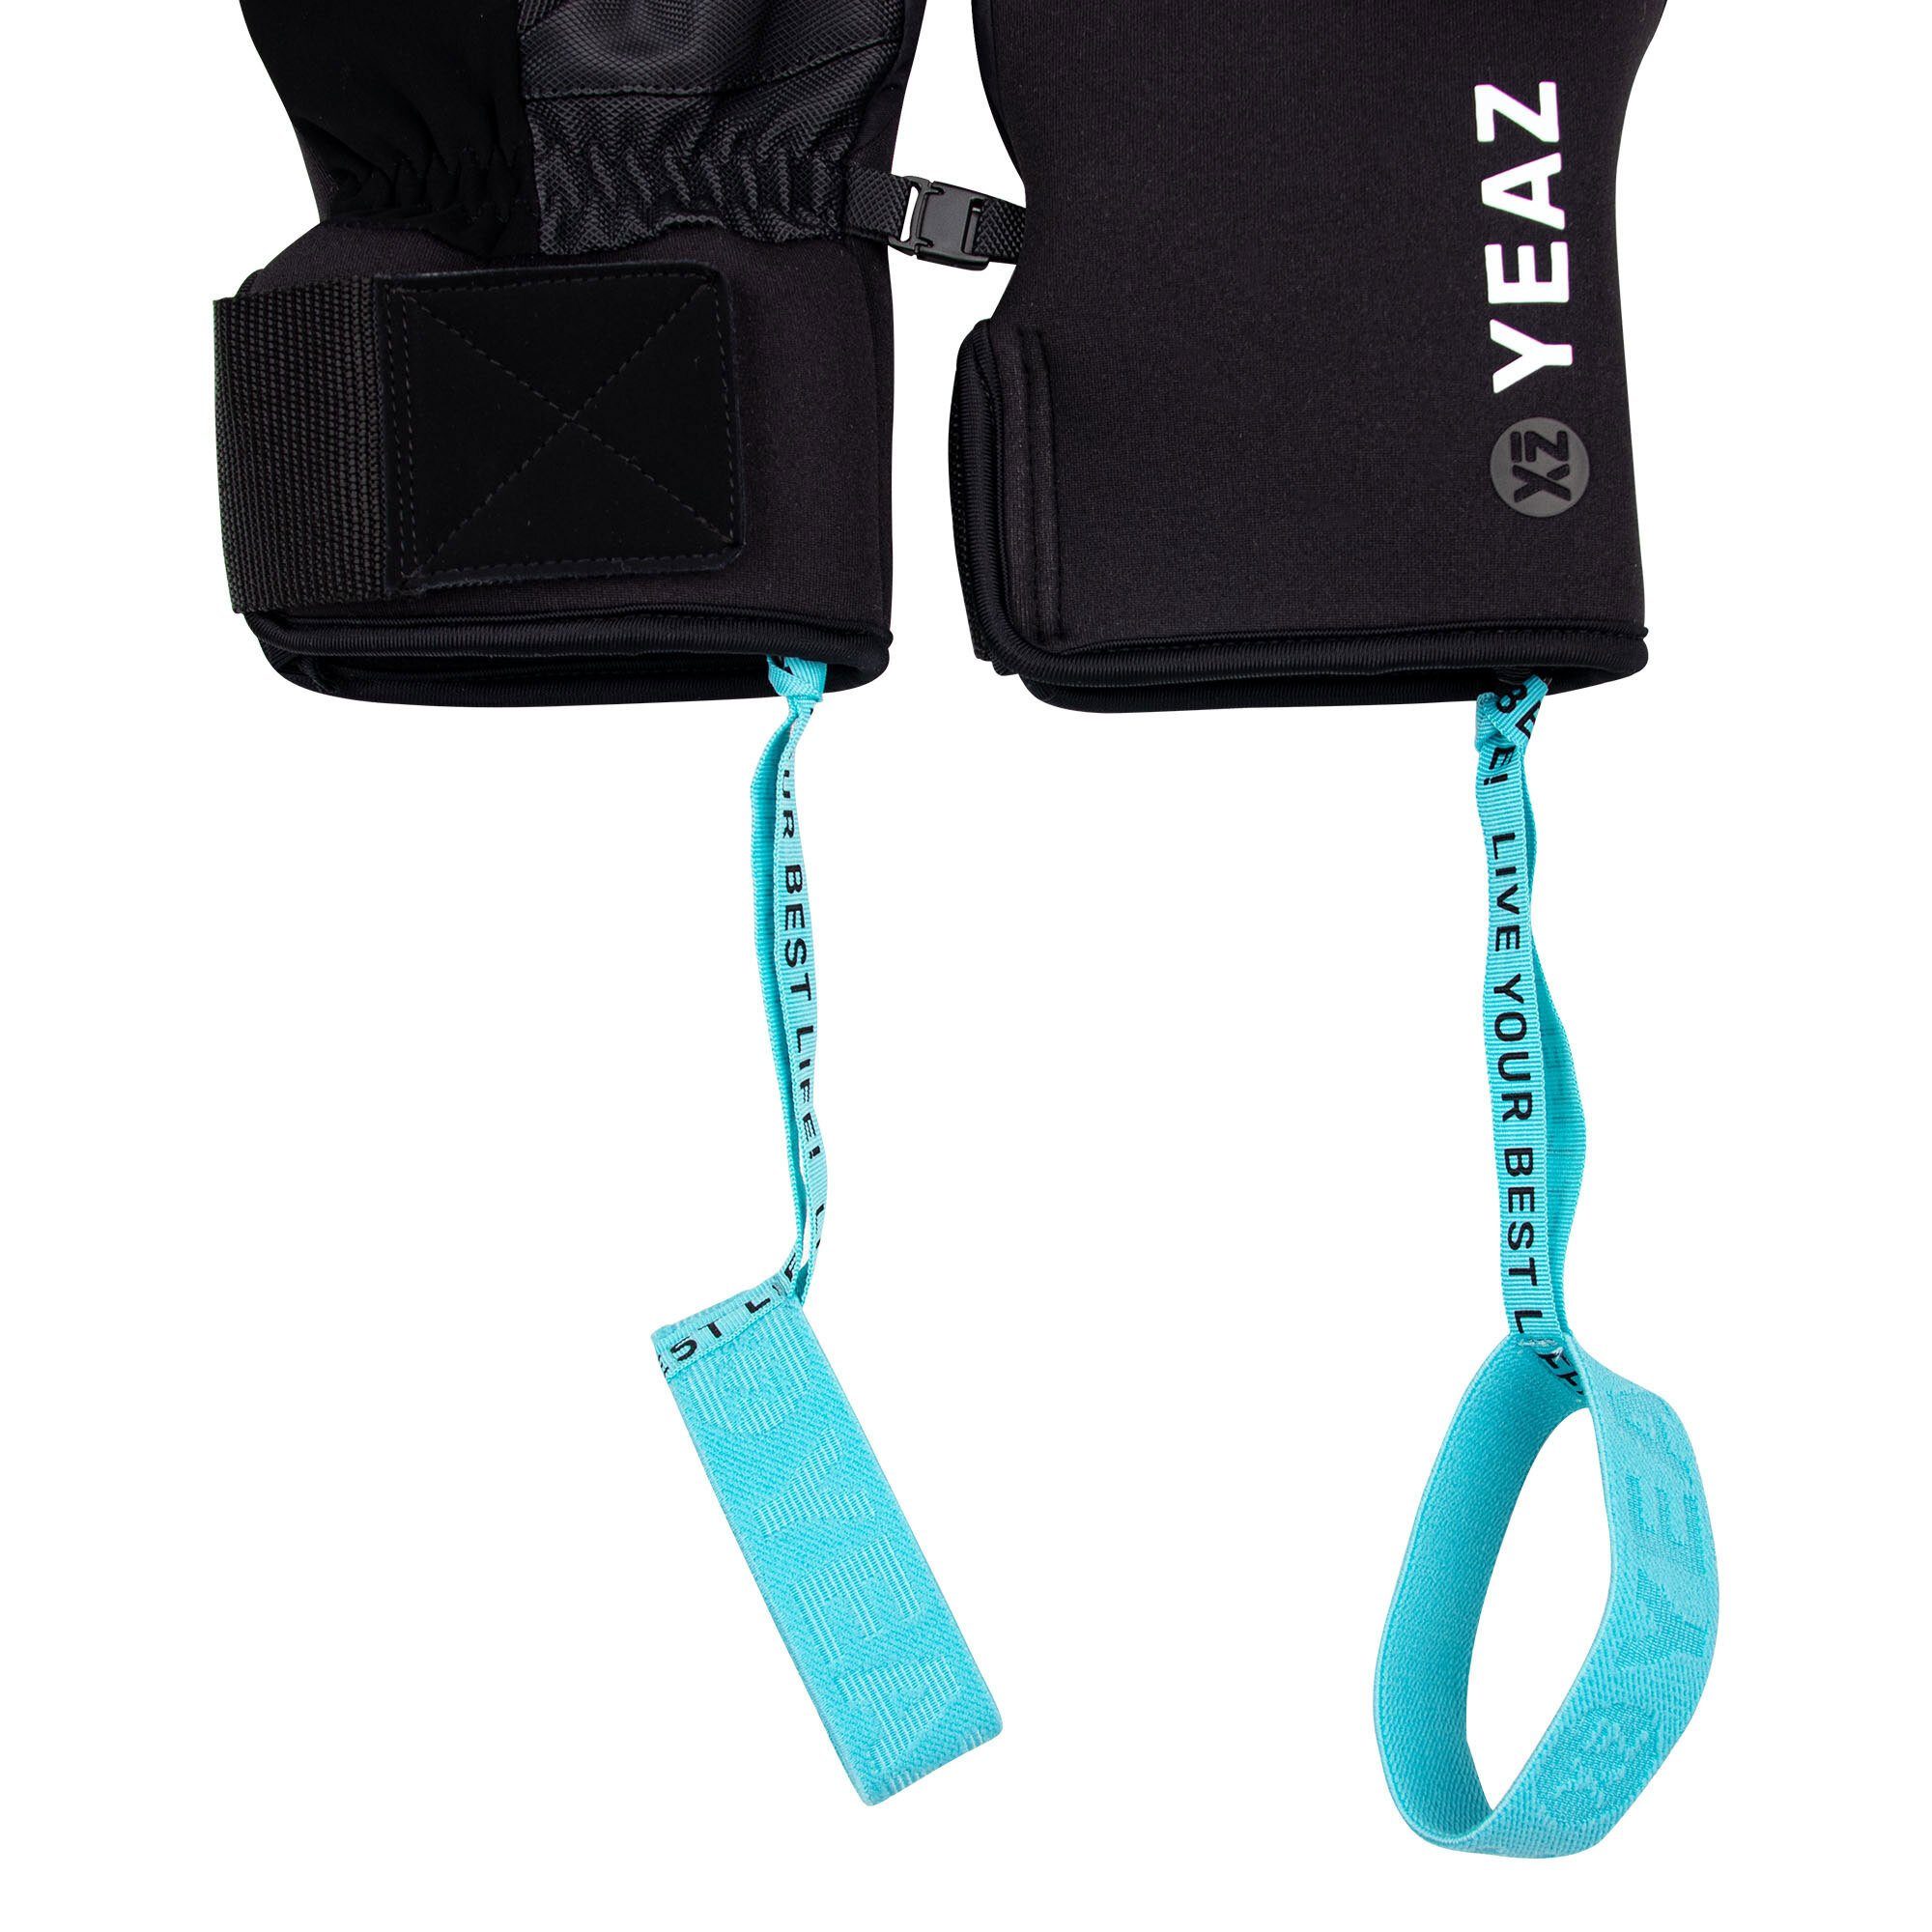 YEAZ Skihandschuhe Touch-Funktion & Wrist-Band fausthandschuhe POW